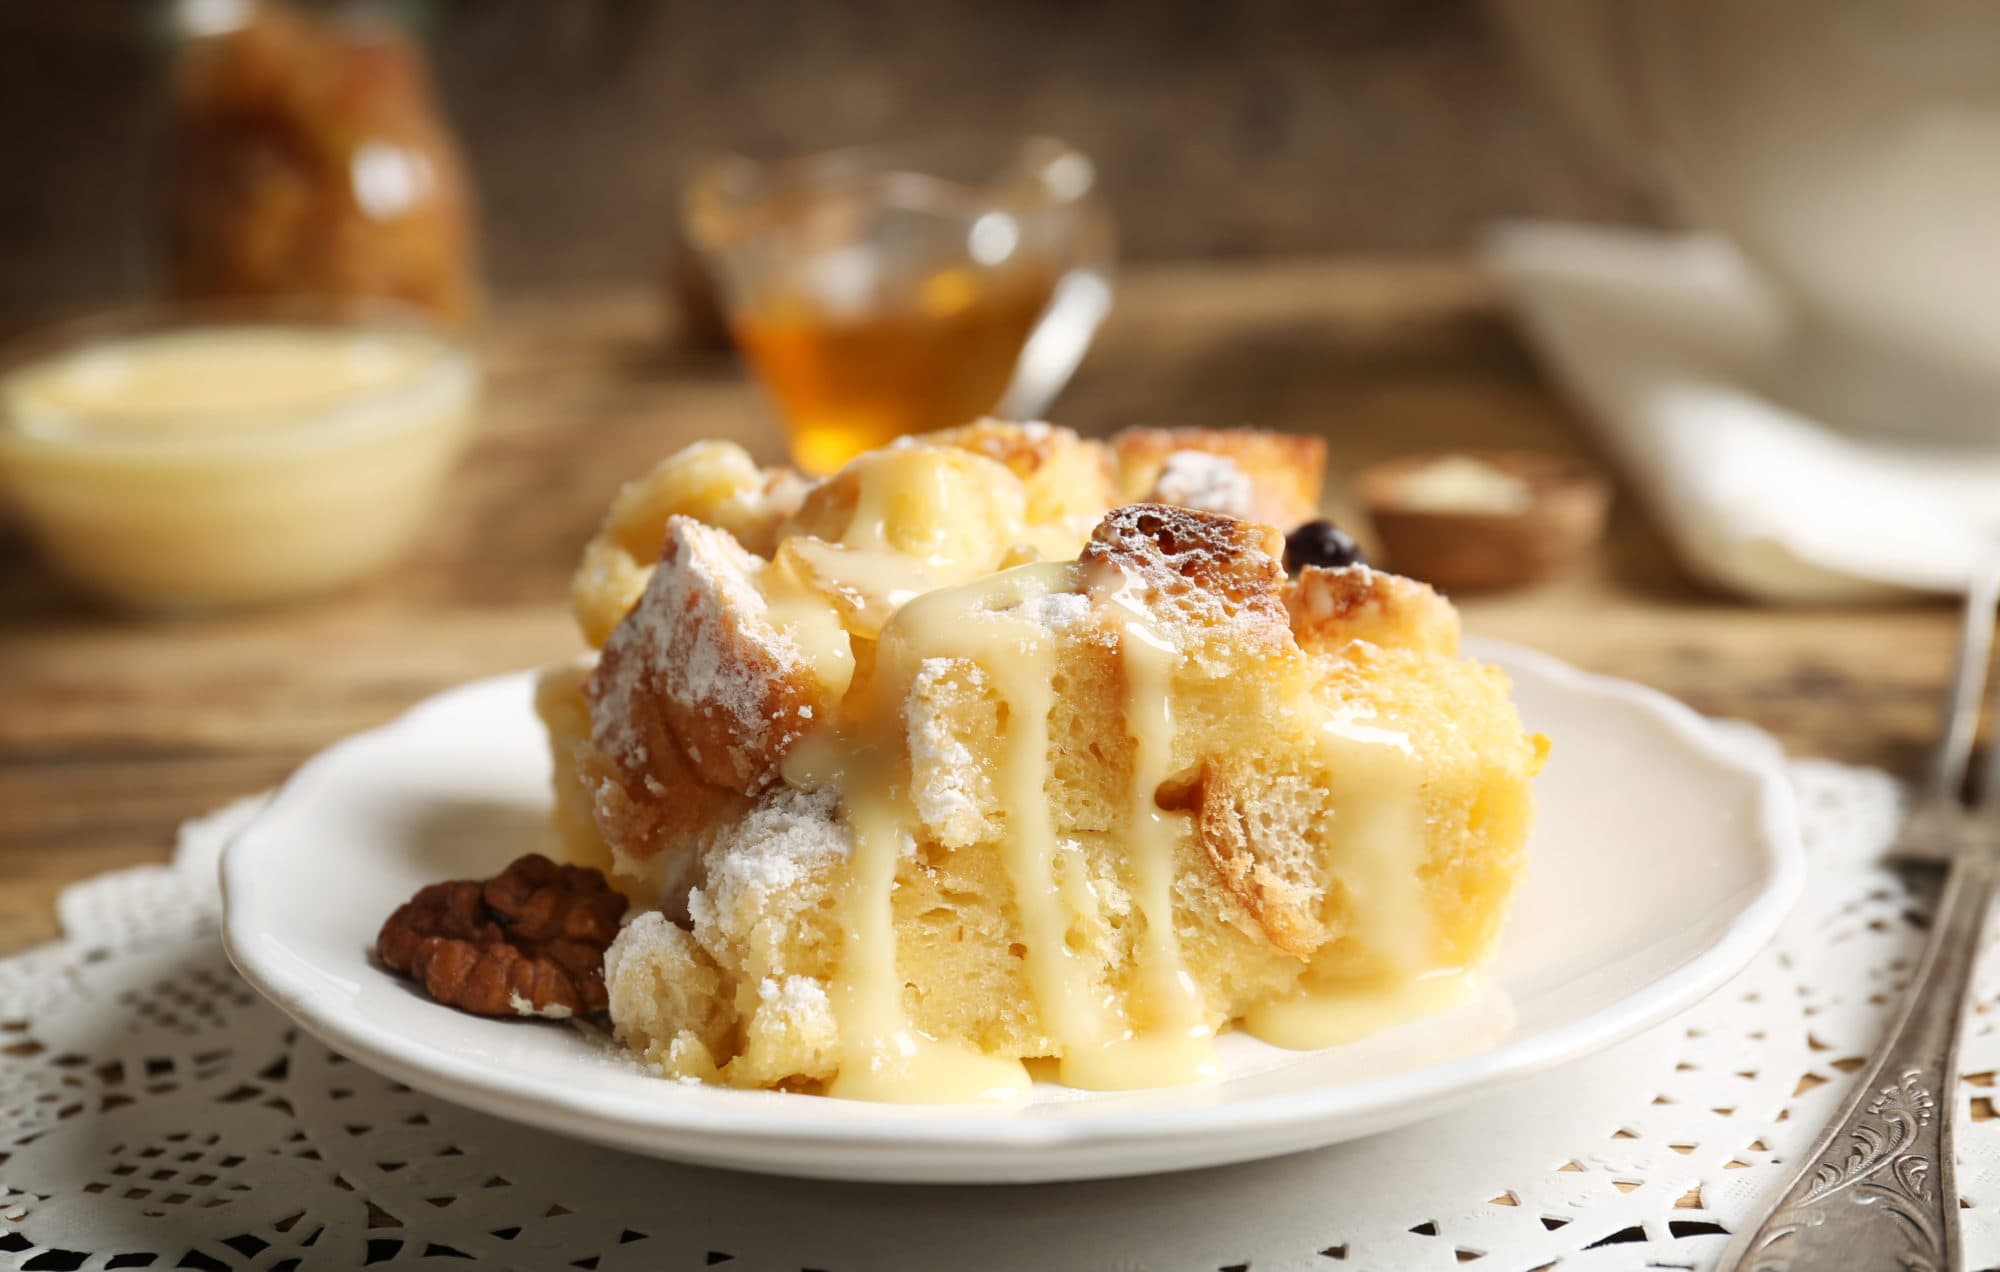 Tasty bread pudding with sugar powder on plate